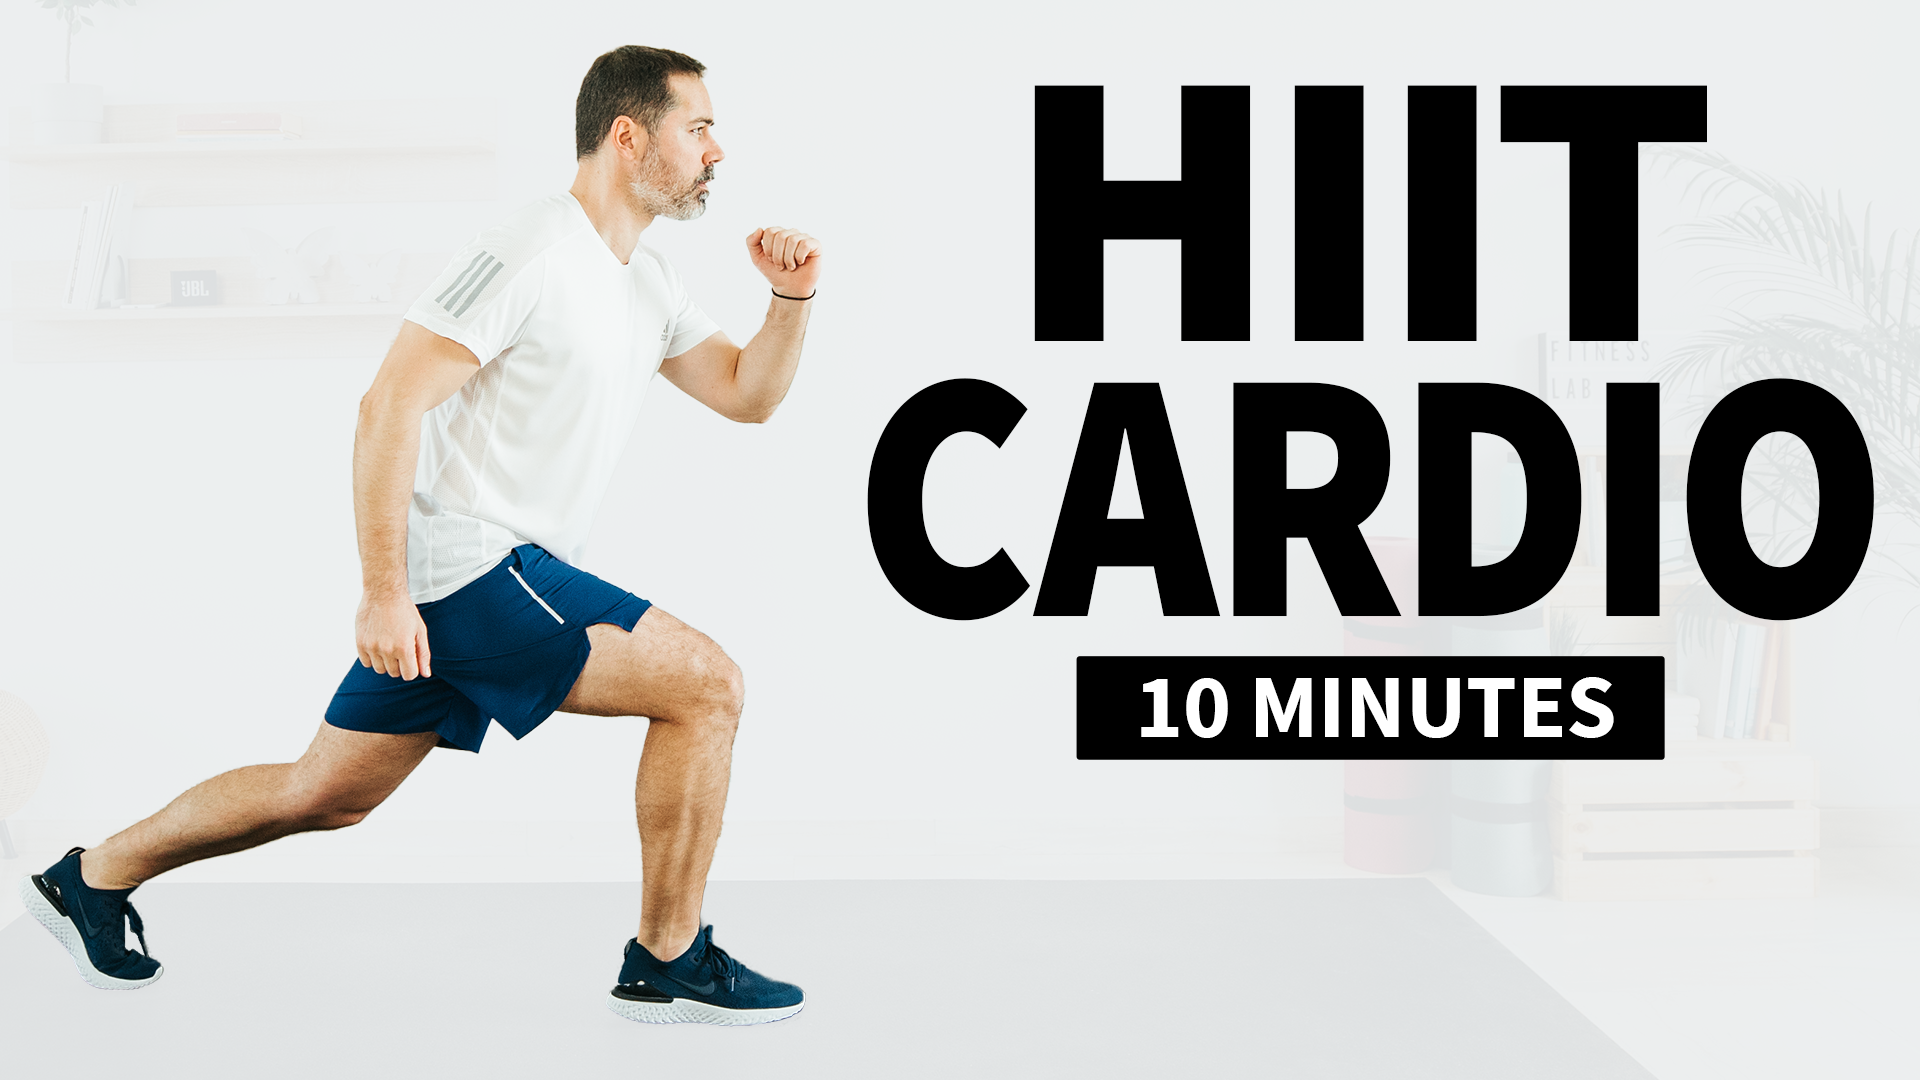 Replace Gym With This 10 Min HIIT/CARDIO Workout